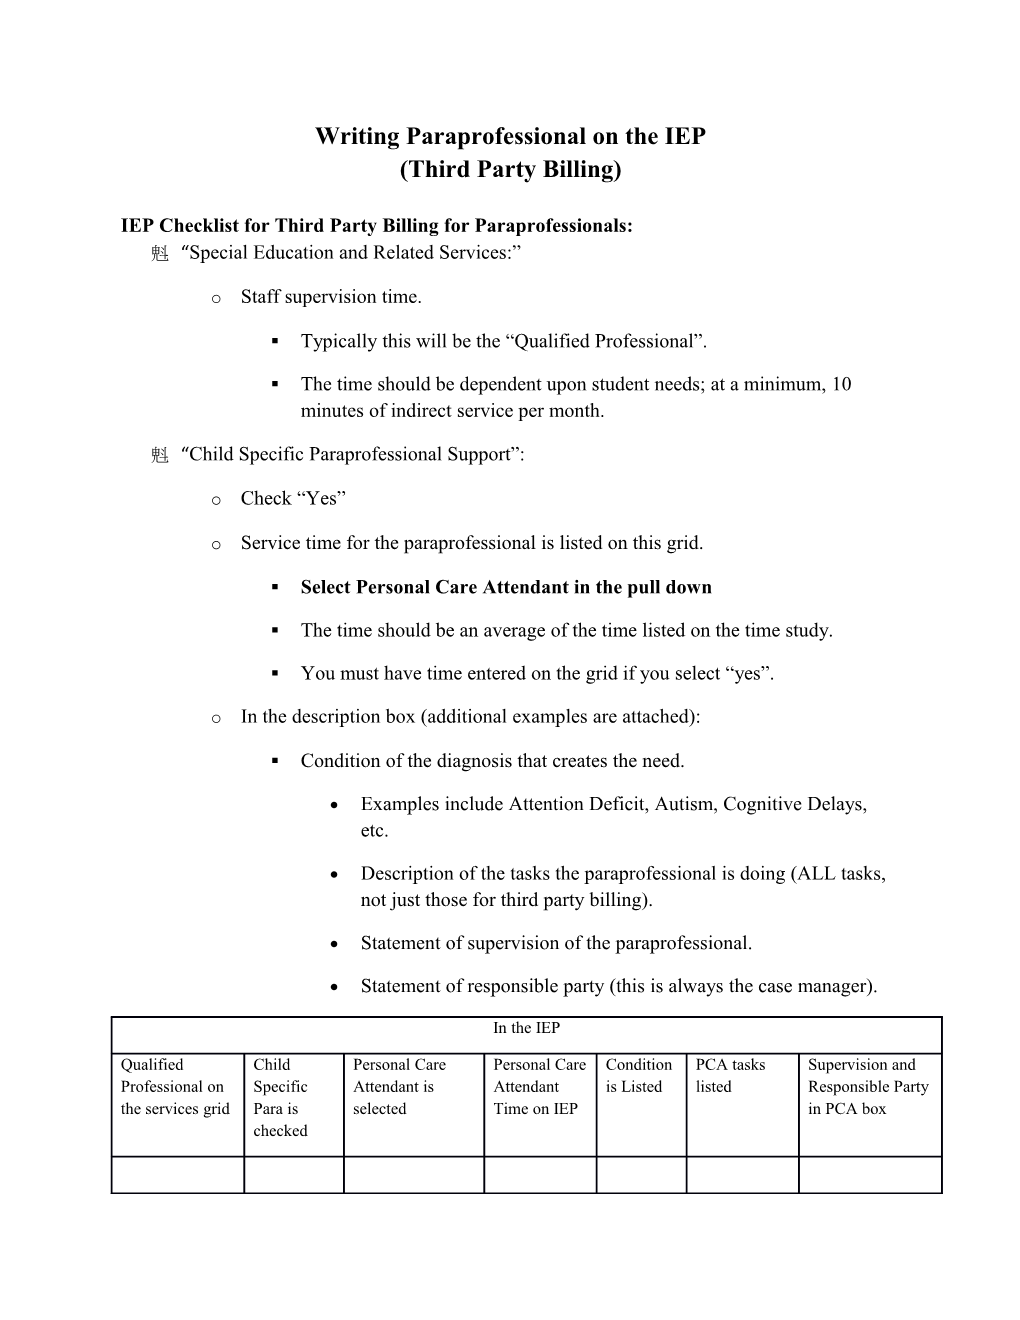 IEP Checklist For